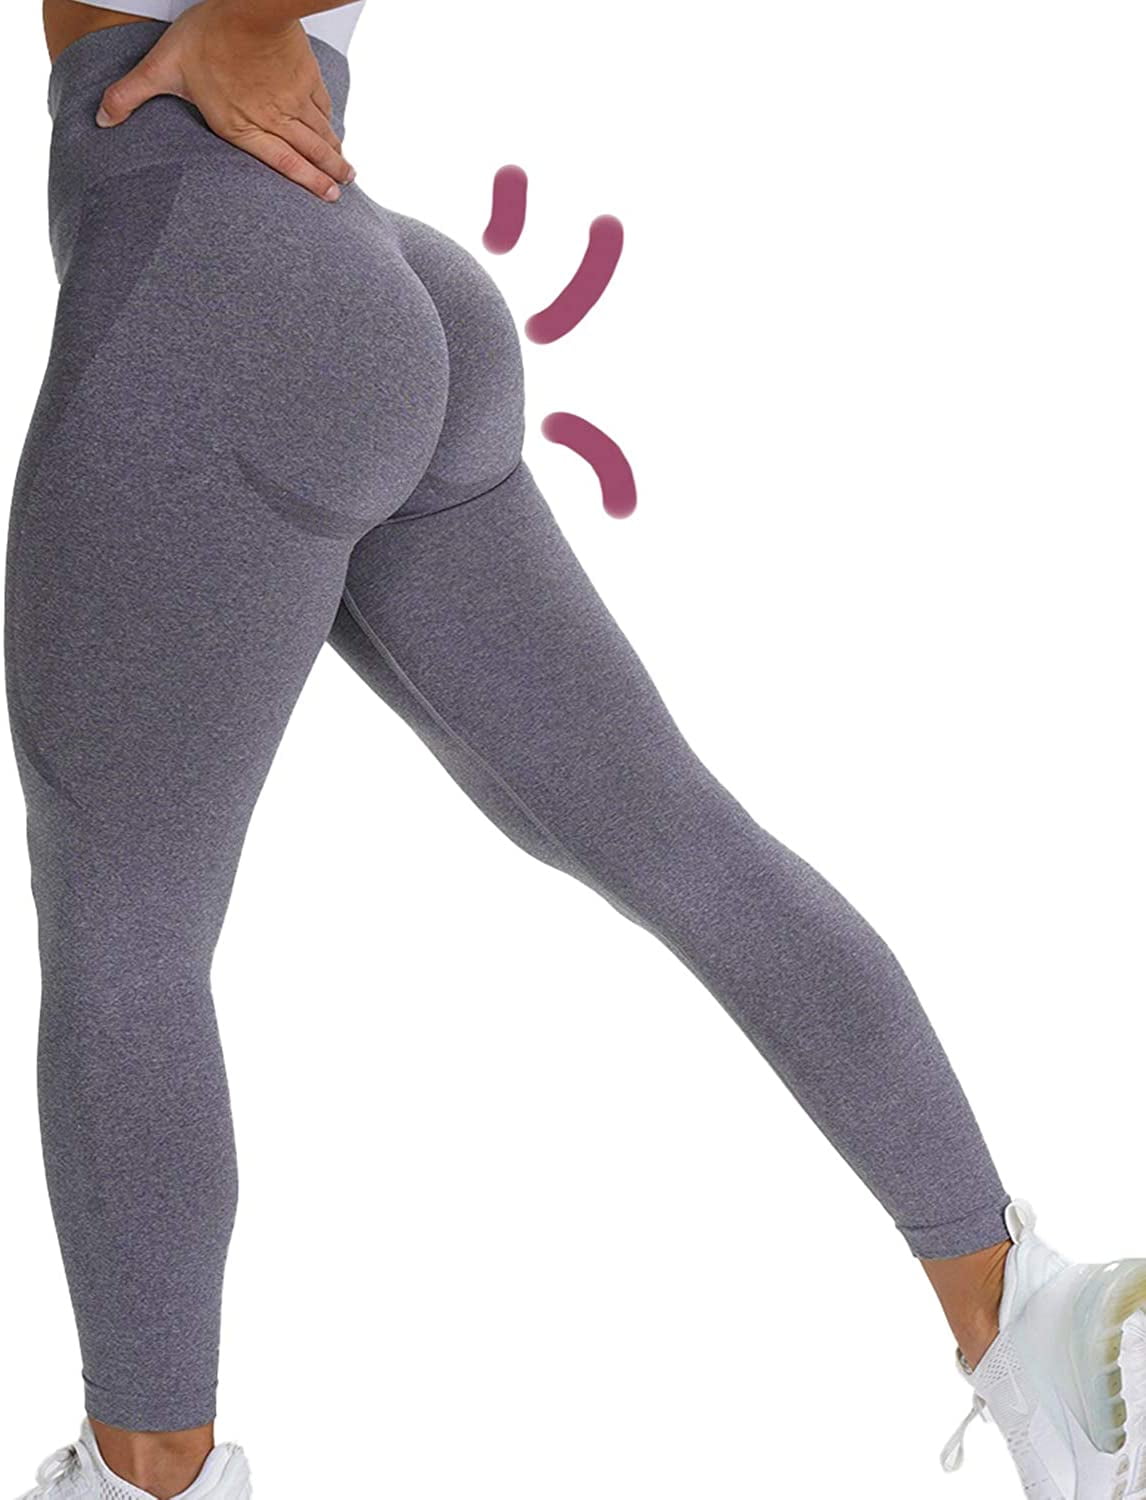 JJ yyds Seamless Leggings Womens Butt' Lift Curves Workout Tights